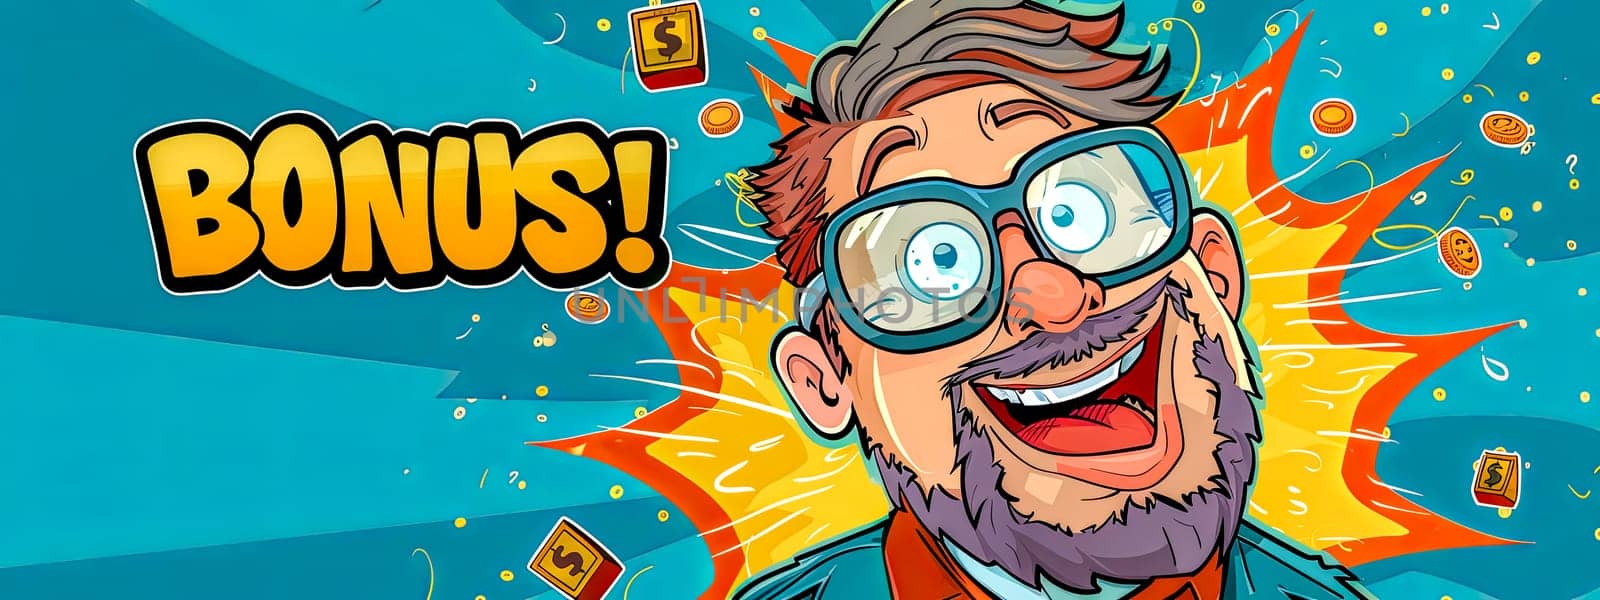 Cartoon of a man with glasses reacting with joy to a bonus! announcement